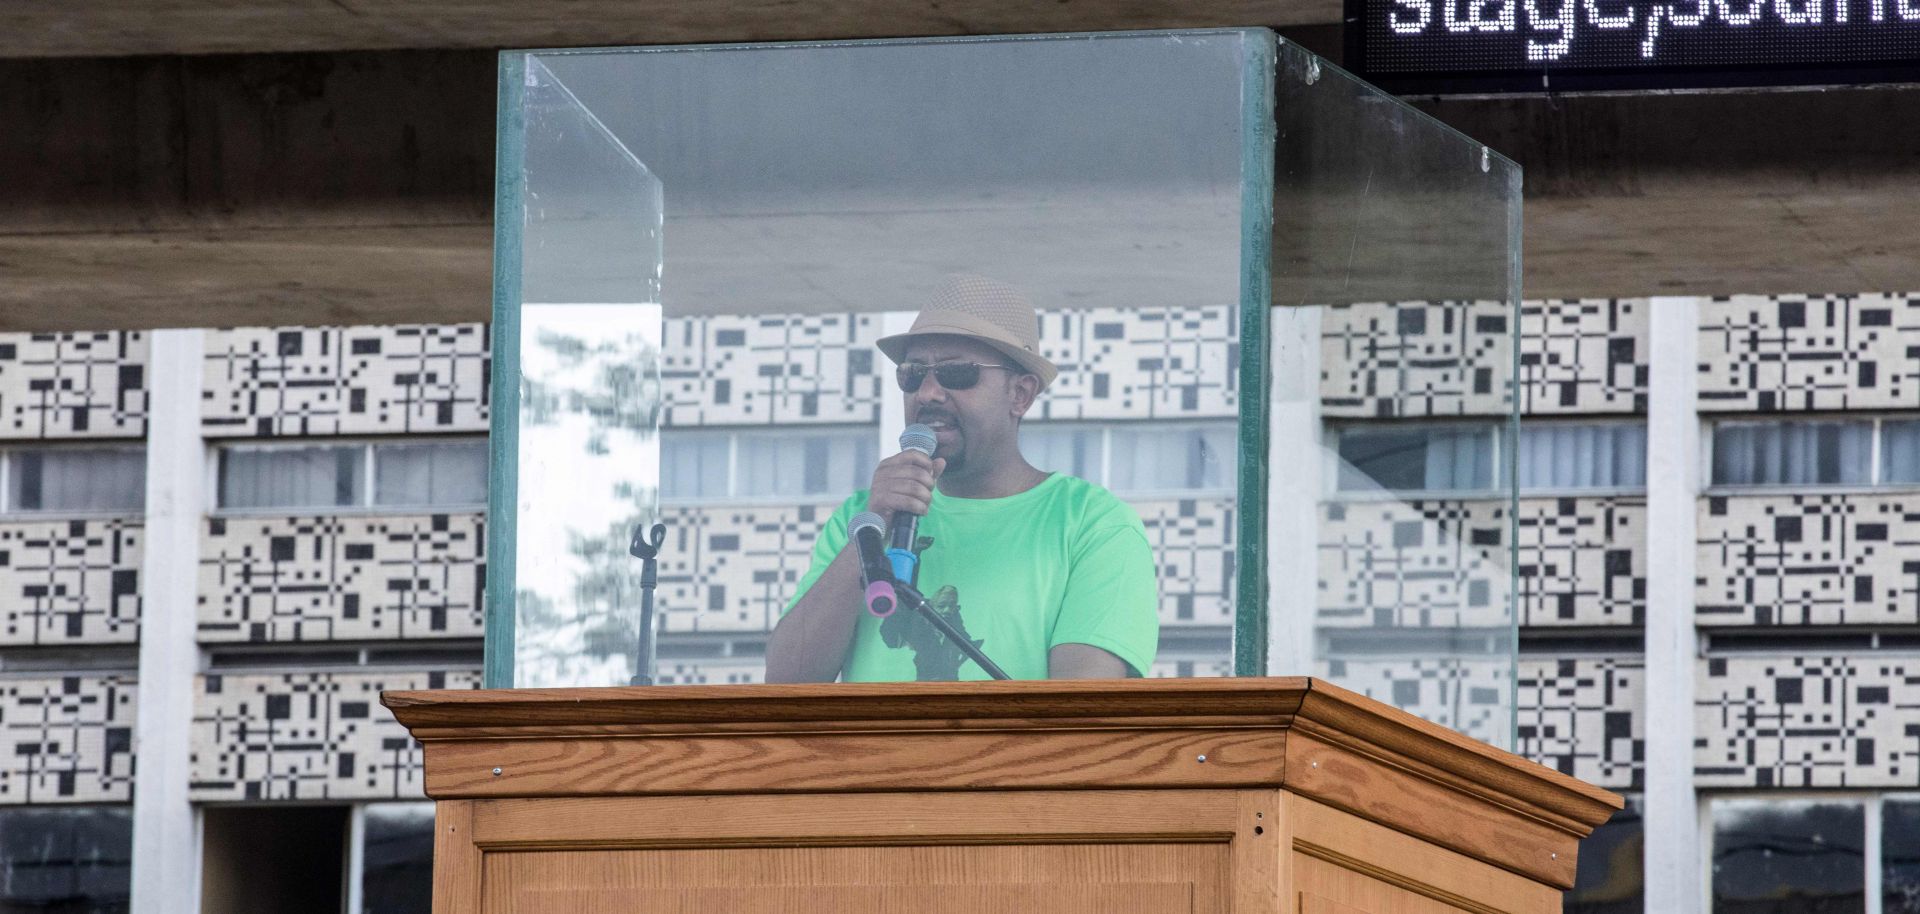 Ethiopian Prime Minister Abiy Ahmed addresses a rally behind protective glass in Addis Ababa on June 23.